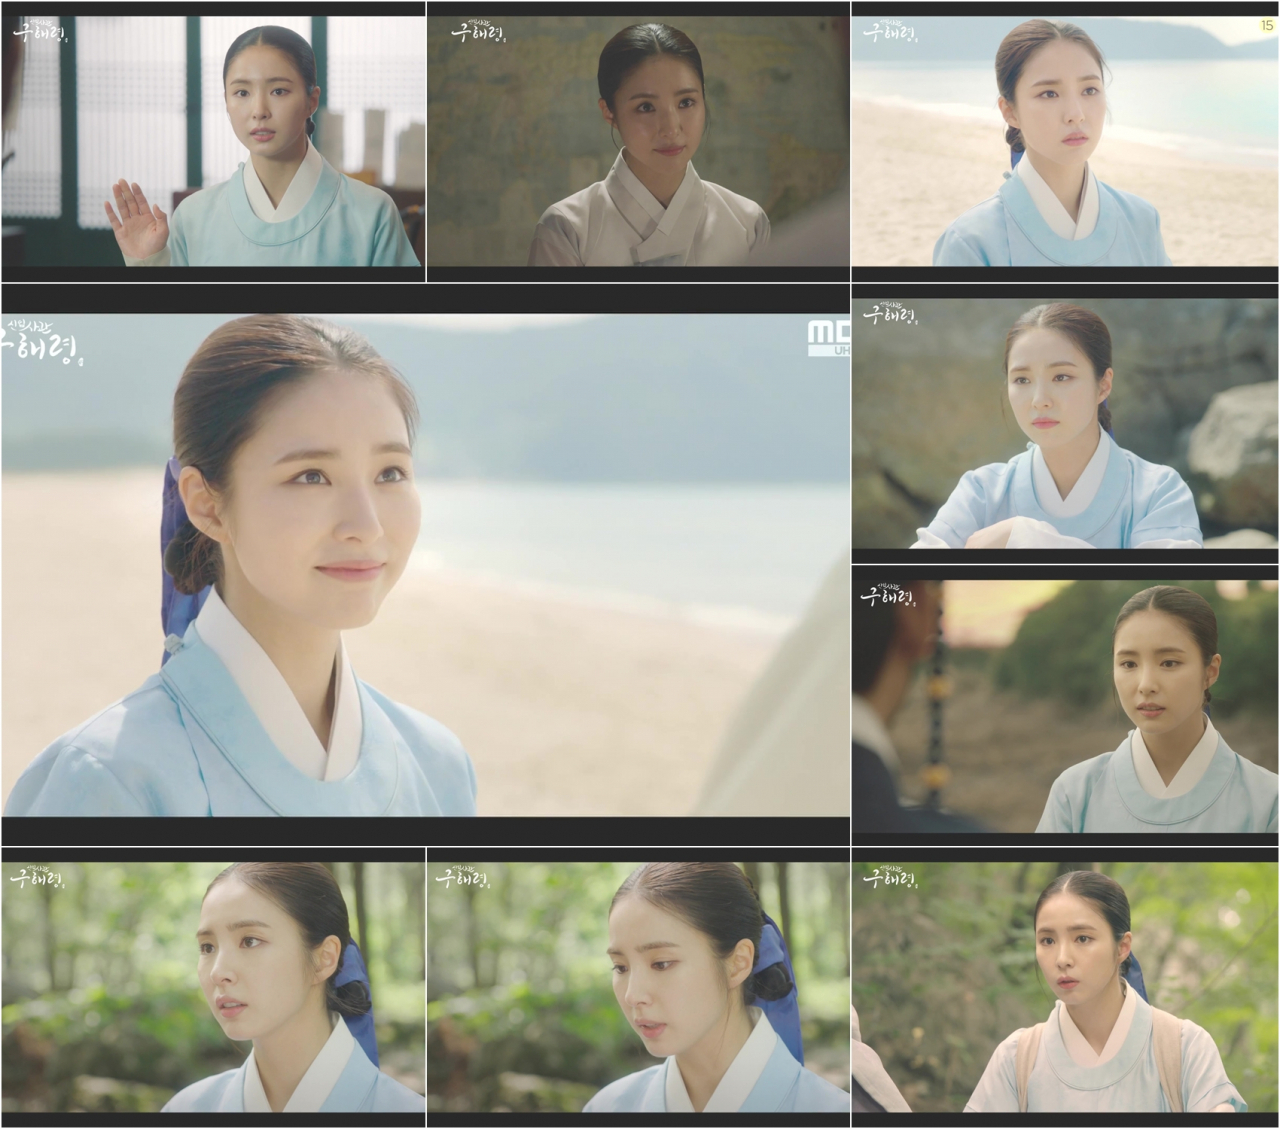 Shin Se-kyung, a new employee, is digesting female raw saws without difficulty.The drama features the first problematic Ada Lovelace () of Joseon and the Phil full romance annals of Prince Irim, the anti-war mother Solo.In the play, Shin Se-kyung is in the midst of the unique Ada Lovelace Na Hae-ryung station to overturn the Joseon Faldo beyond Hanyang.In the 19th century Joseon, where Sungrihak ruled, women had to take priest classes instead of study, and have virtues that they did not know.But Na Hae-ryung is a new woman who wants to go to a wider world and to be able to say what to say.In other words, rather than living in time, the enterprising appearance that the master of destiny is himself and can change at any time broke the existing framework.In this respect, the meaning of the character Na Hae-ryung is special.Shin Se-kyung proved his true value by showing not only the beginning and end of the story but also the control.Especially, the delicate inner acting, the seriousness and pleasantness, is excellent, and the center of the play is firmly supported.This was also possible due to the spectrum that has been expanded by digesting various characters.In addition, Shin Se-kyung is the back door that he has devoted a lot of heart to the outside, starting from the previous stereotype to complete it with a three-dimensional character.Especially, the straight attitude that shows intensely embedded eyes in the minds of viewers, stable vocalization, accurate diction, and proud spirit expresses the old Na Hae-ryung itself.Thanks to his performance as a title roll, the drama has maintained the number one spot in the drama drama and has dominated the love of viewers.Through the new employee, Na Hae-ryung, the merits and charms of actor Shin Se-kyung are fully highlighted.Shin Se-kyung, who will show a strong presence in the remaining rounds. Another activity he will show is also attracting attention.